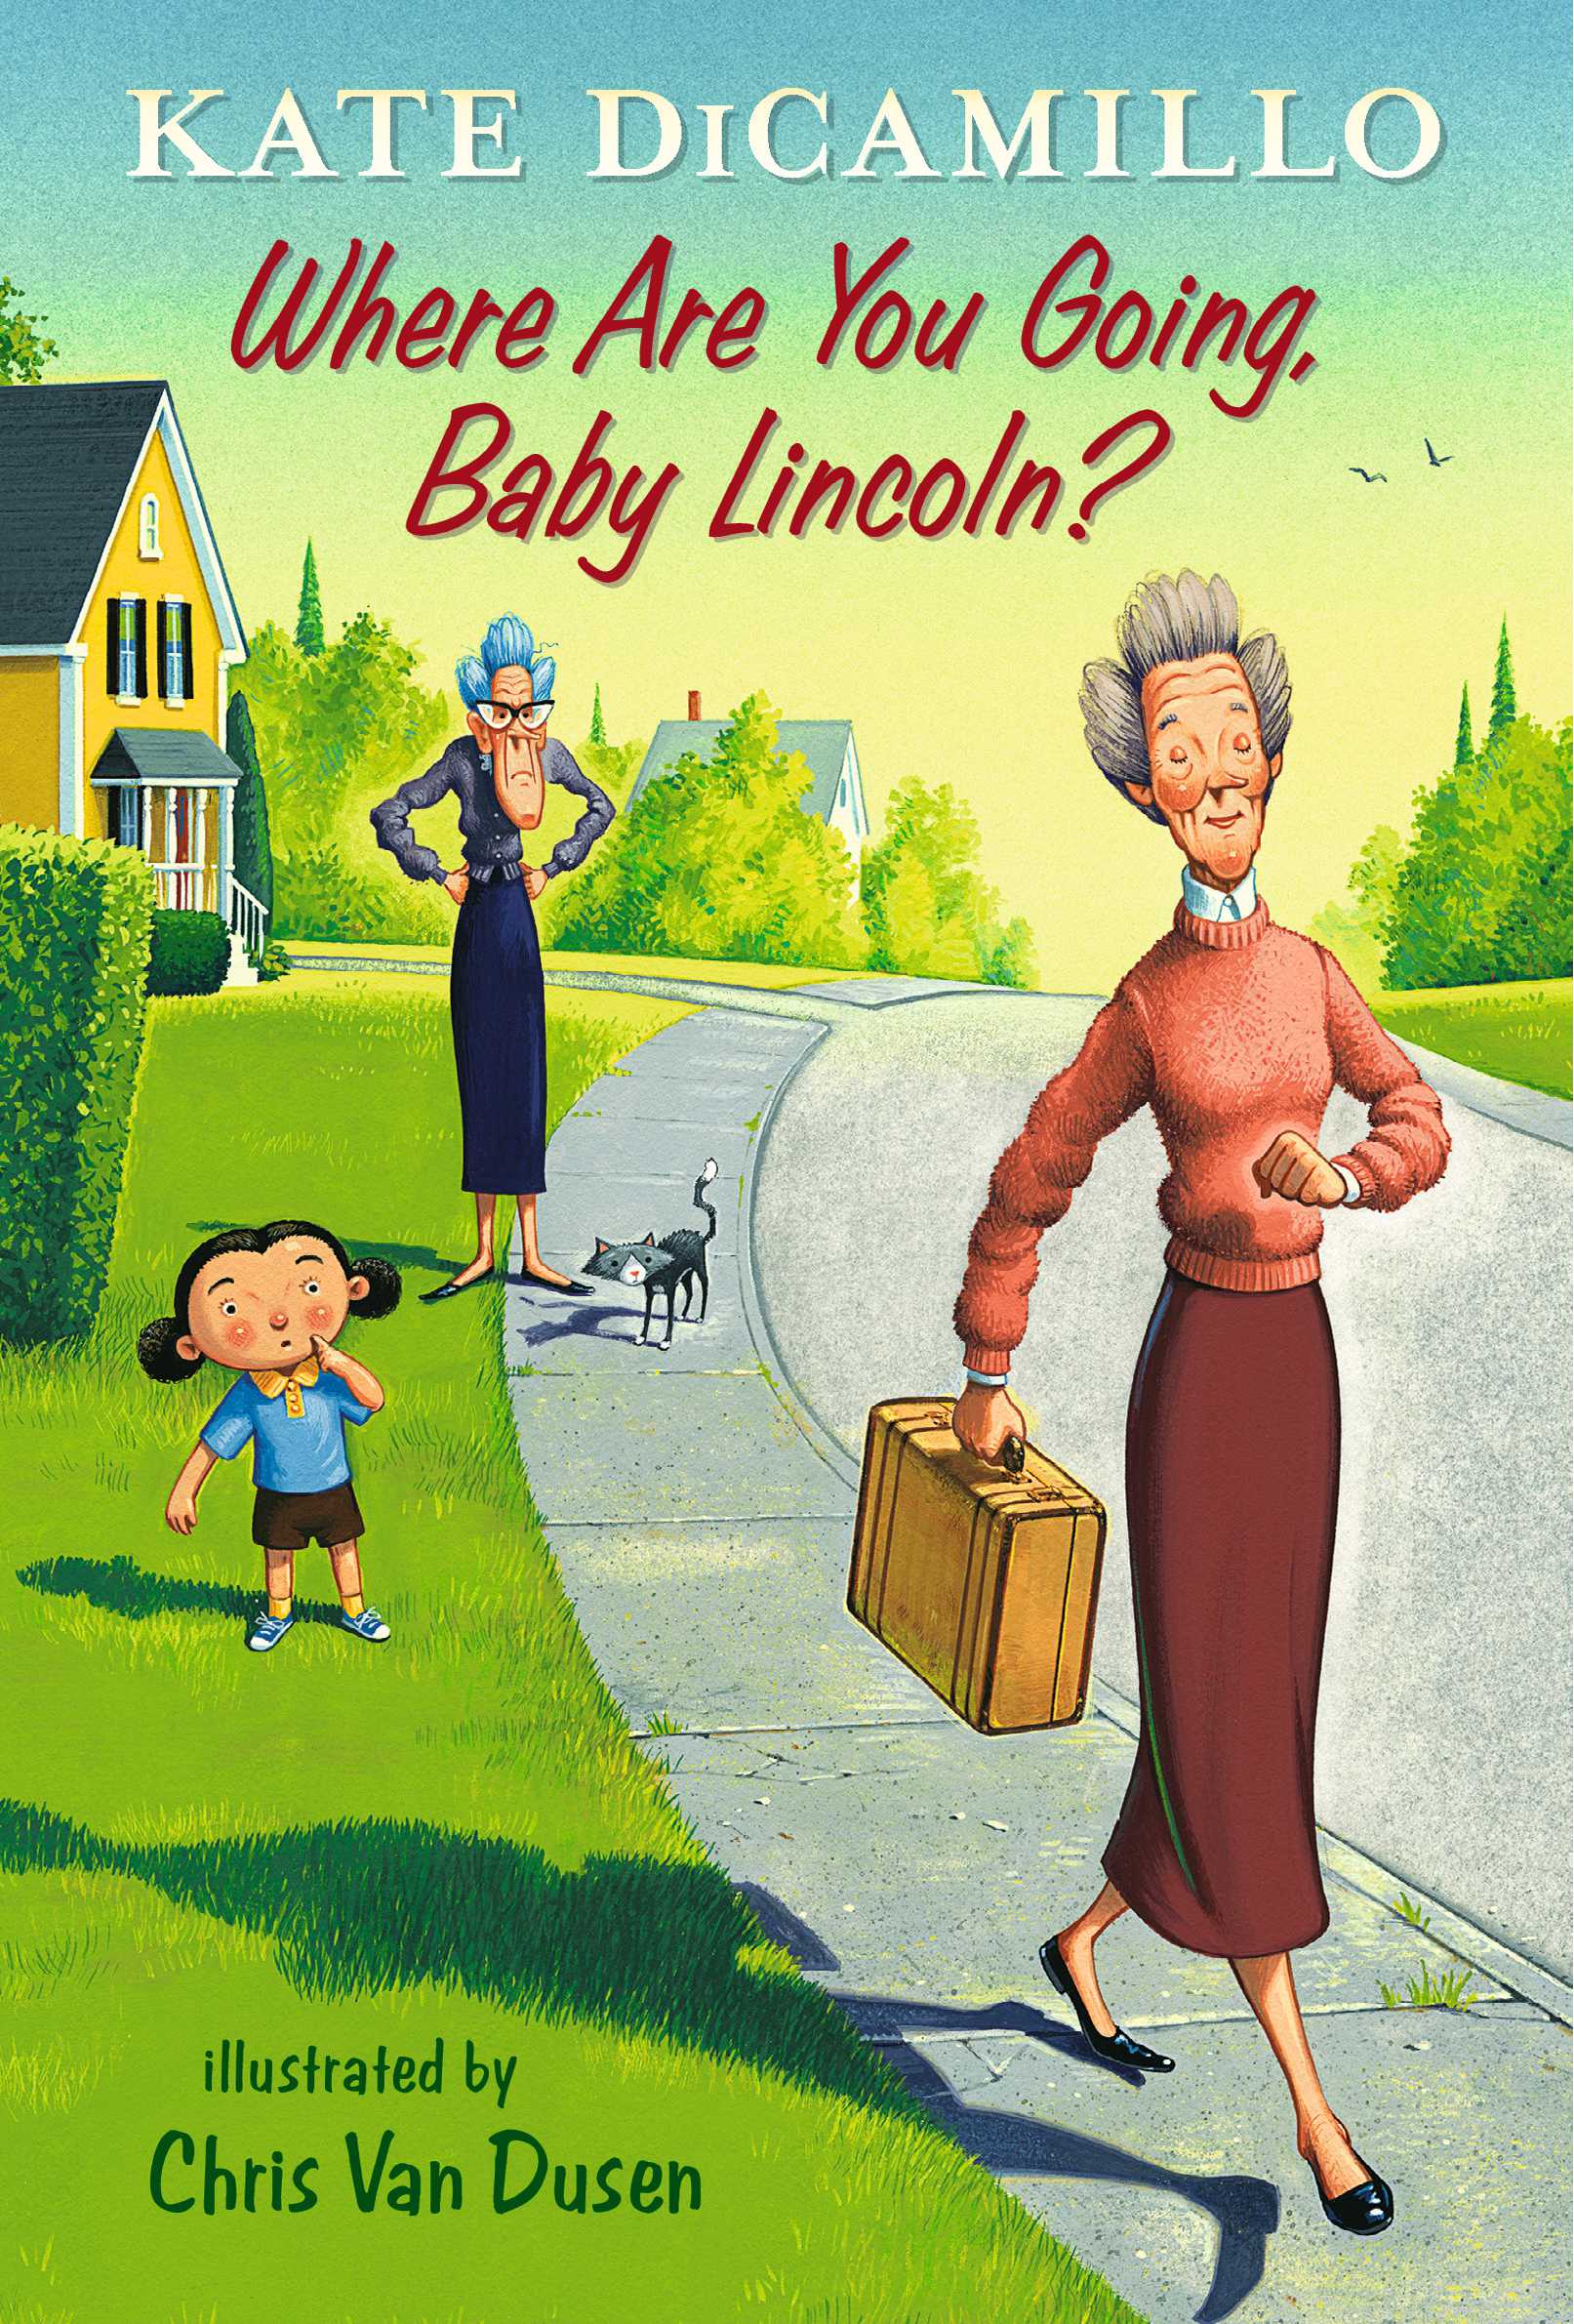 IMG : Where are you Going, Baby Lincoln?